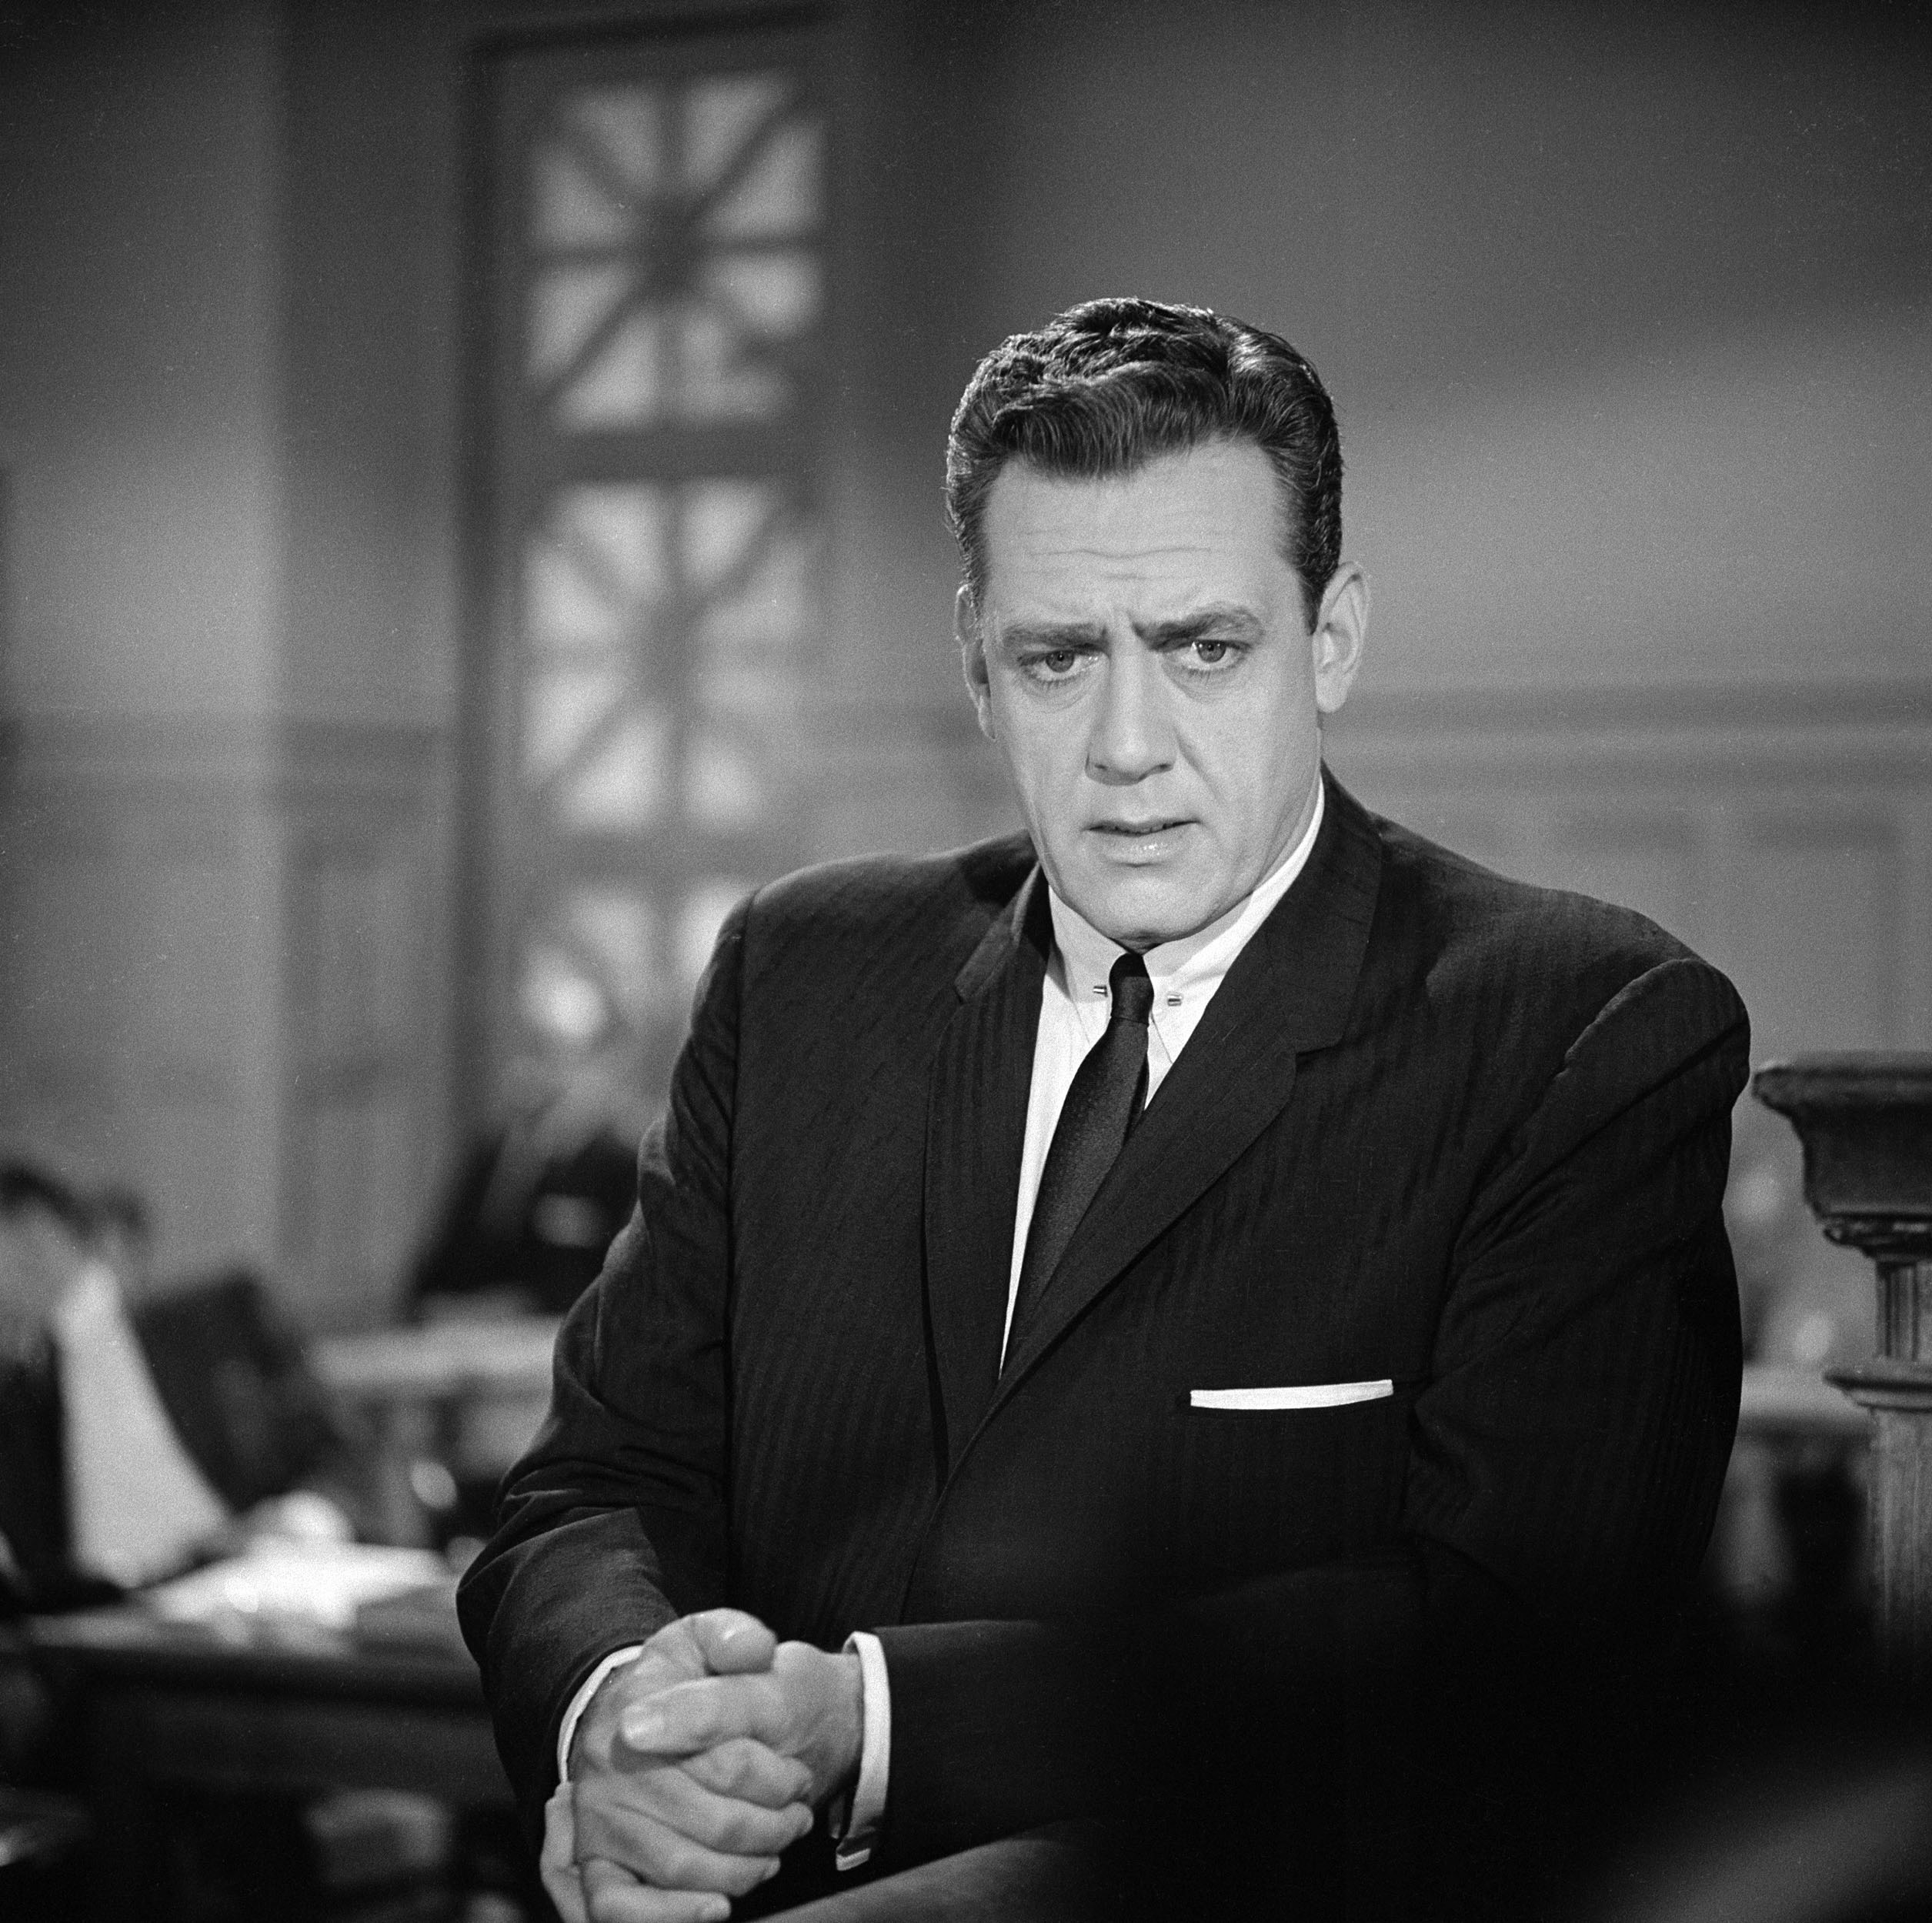 Actor Raymond Burr as Perry Mason in the mystery drama series, "Perry Mason" on September 21, 1961 ┃Source: Getty Images